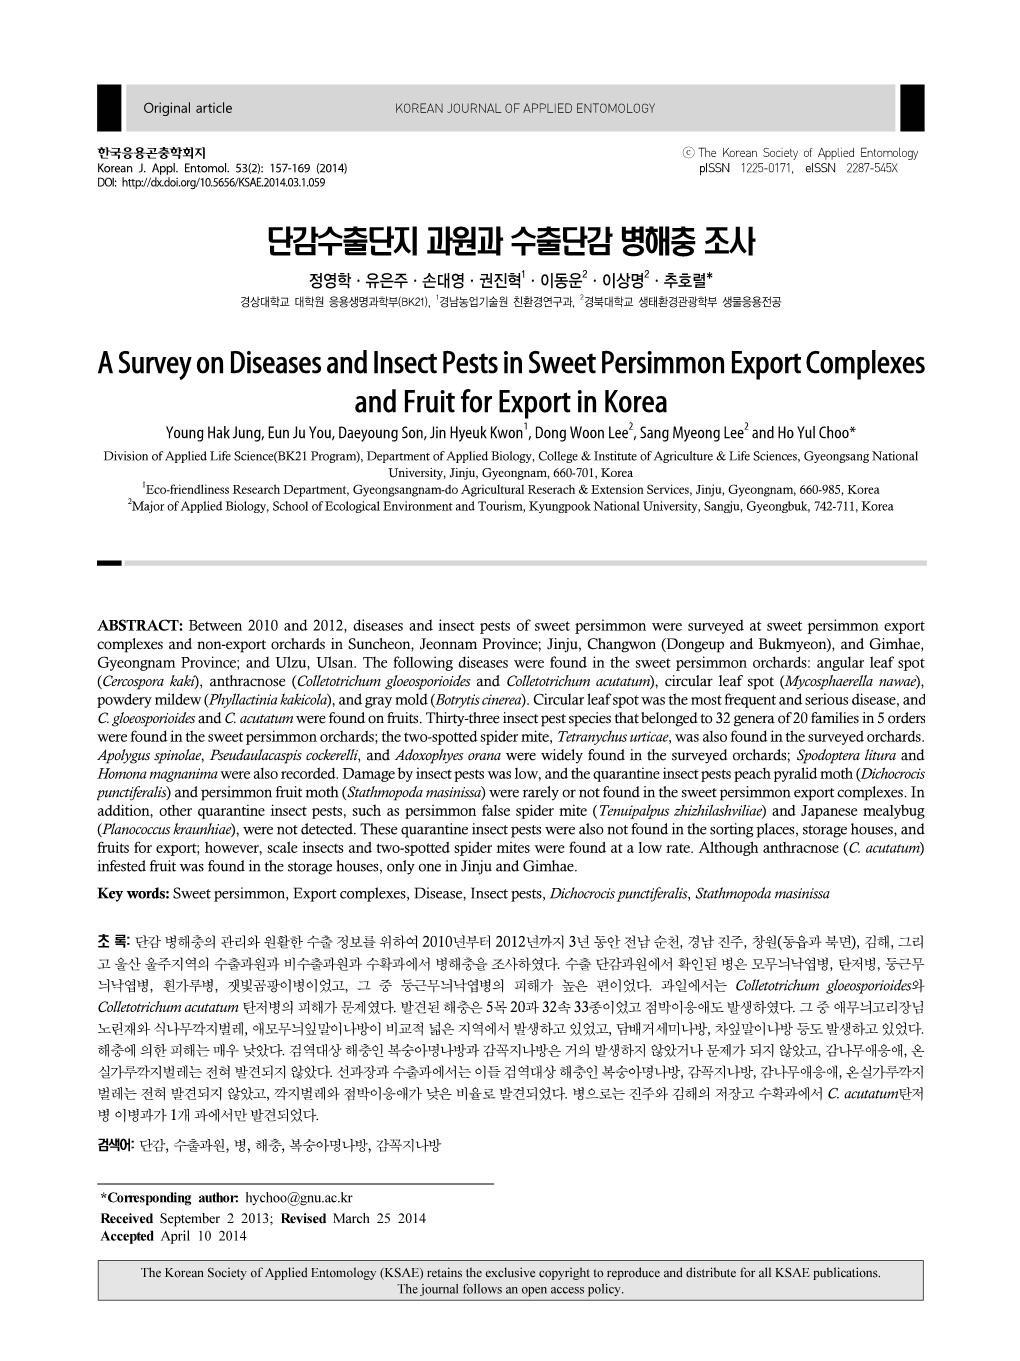 A Survey on Diseases and Insect Pests in Sweet Persimmon Export